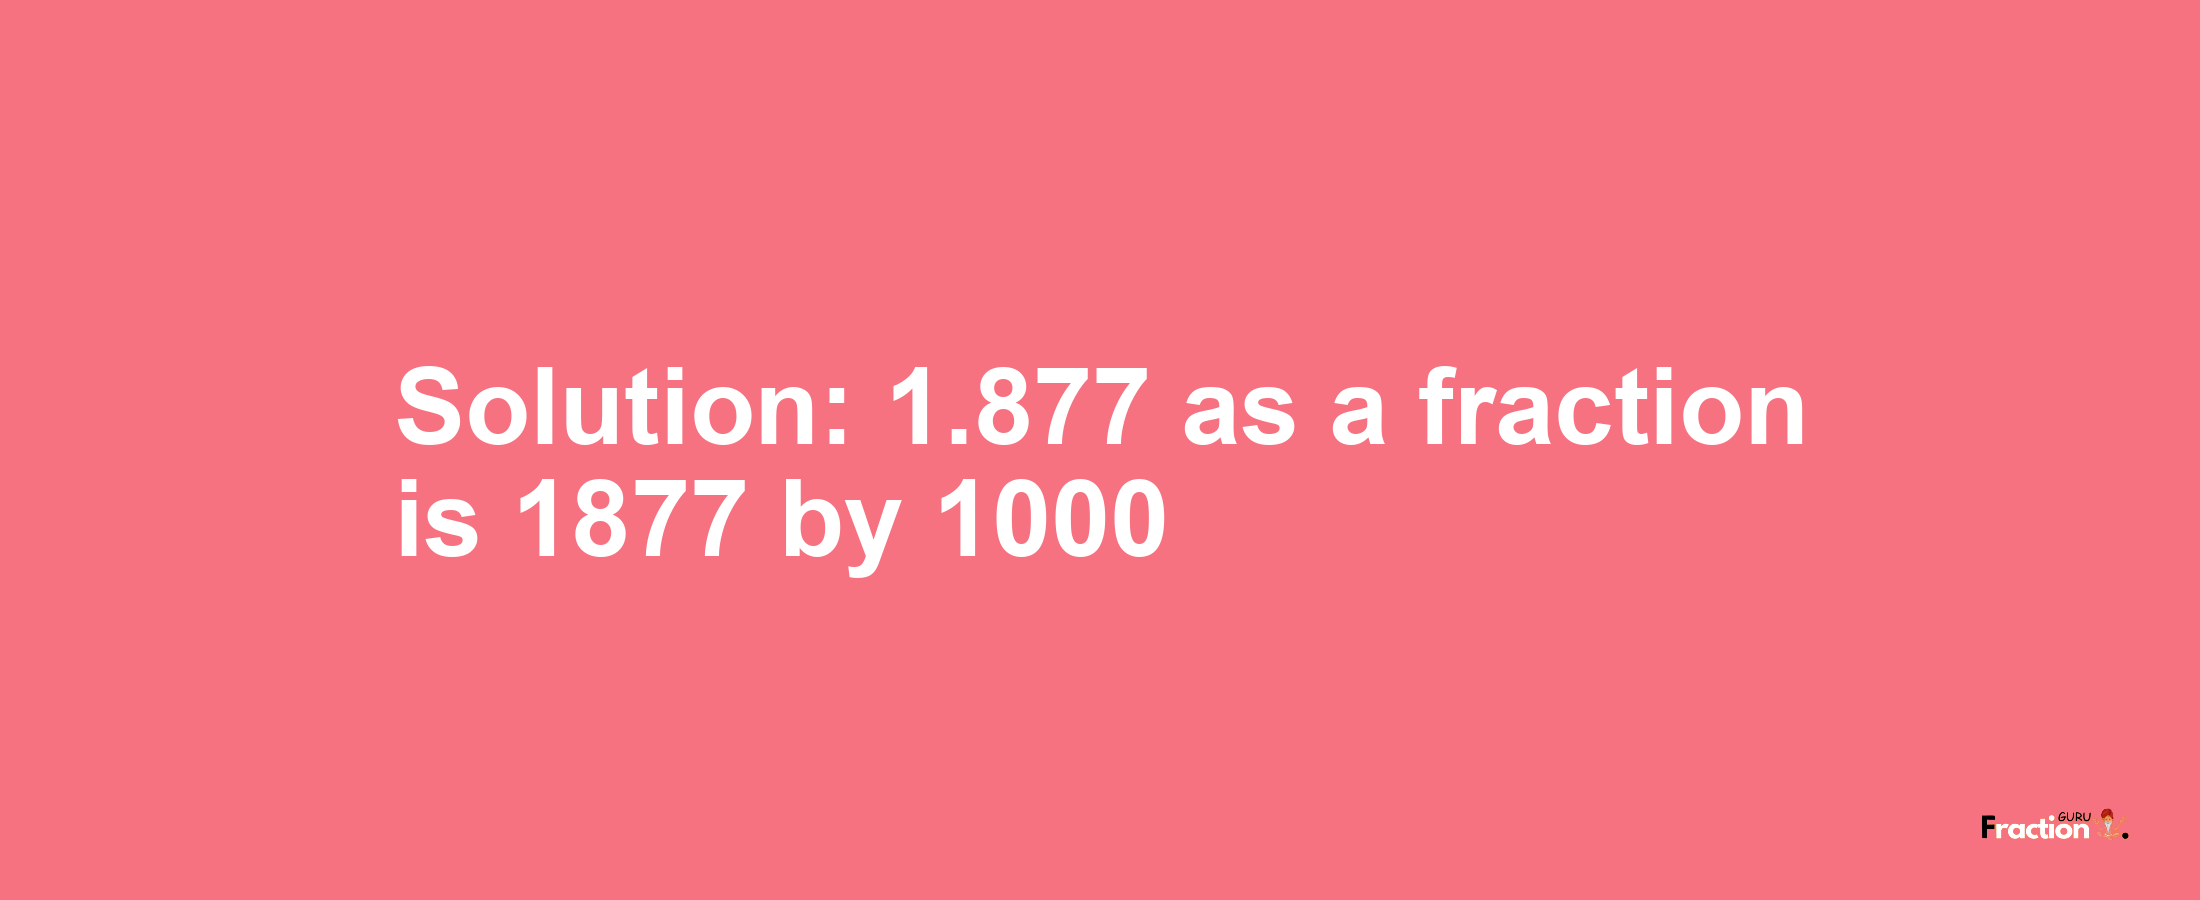 Solution:1.877 as a fraction is 1877/1000